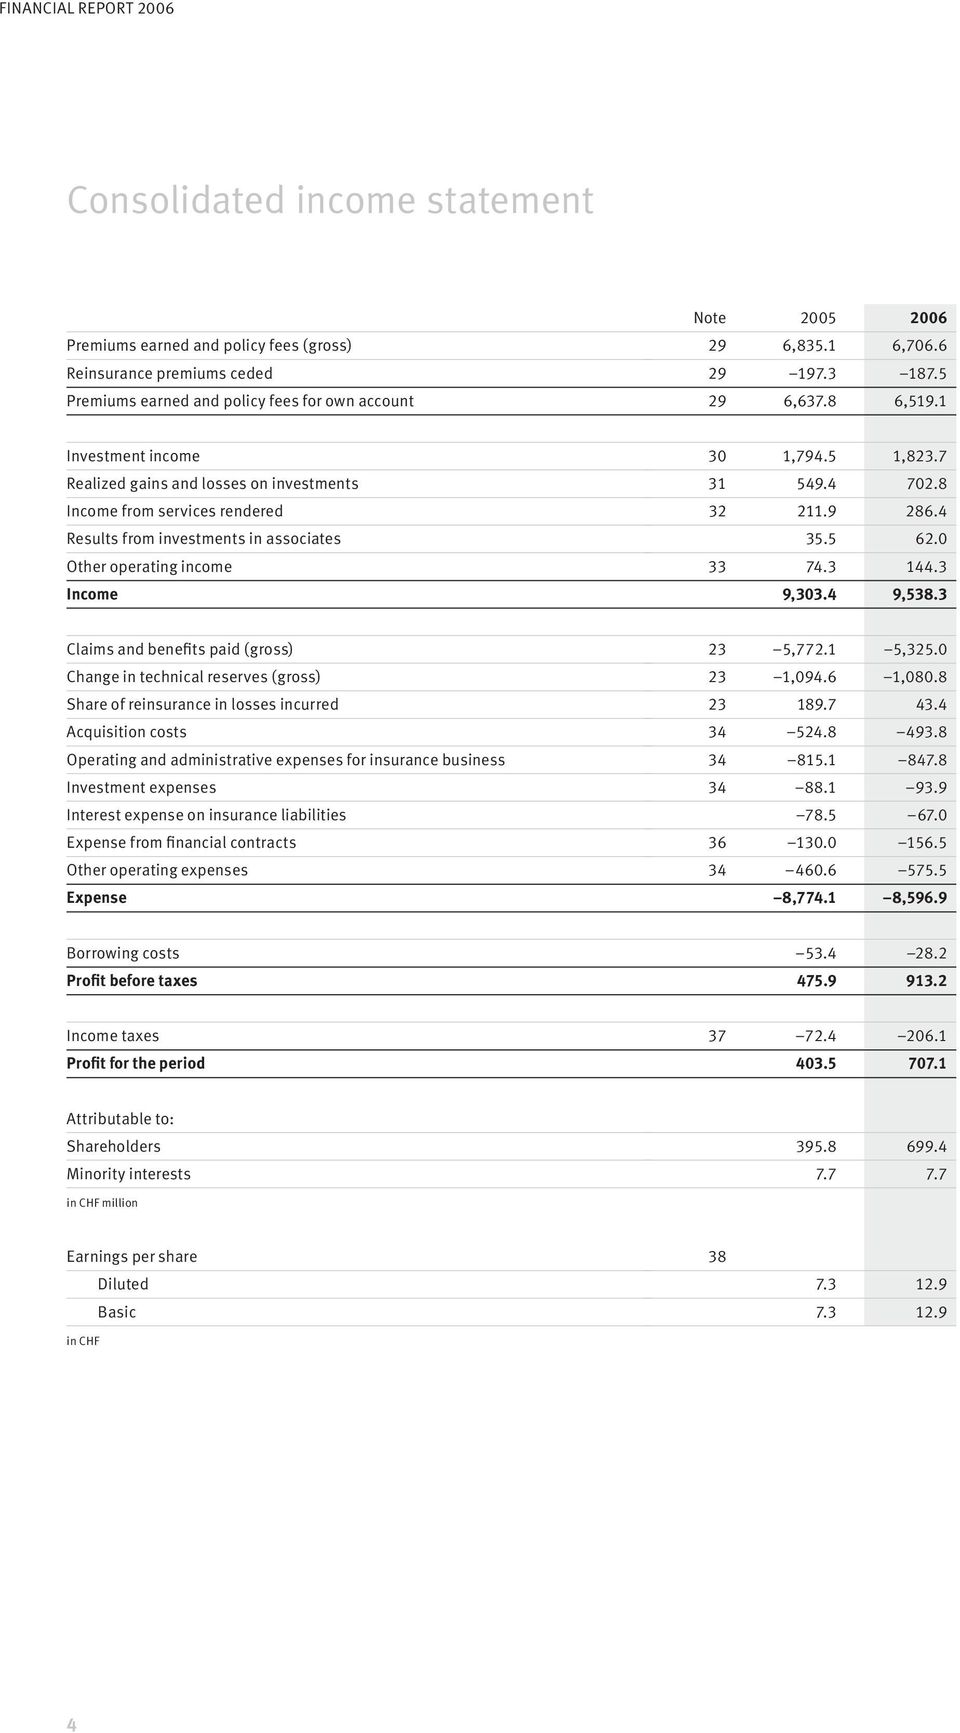 9 286.4 Results from investments in associates 35.5 62.0 Other operating income 33 74.3 144.3 Income 9,303.4 9,538.3 Claims and benefits paid (gross) 23 5,772.1 5,325.